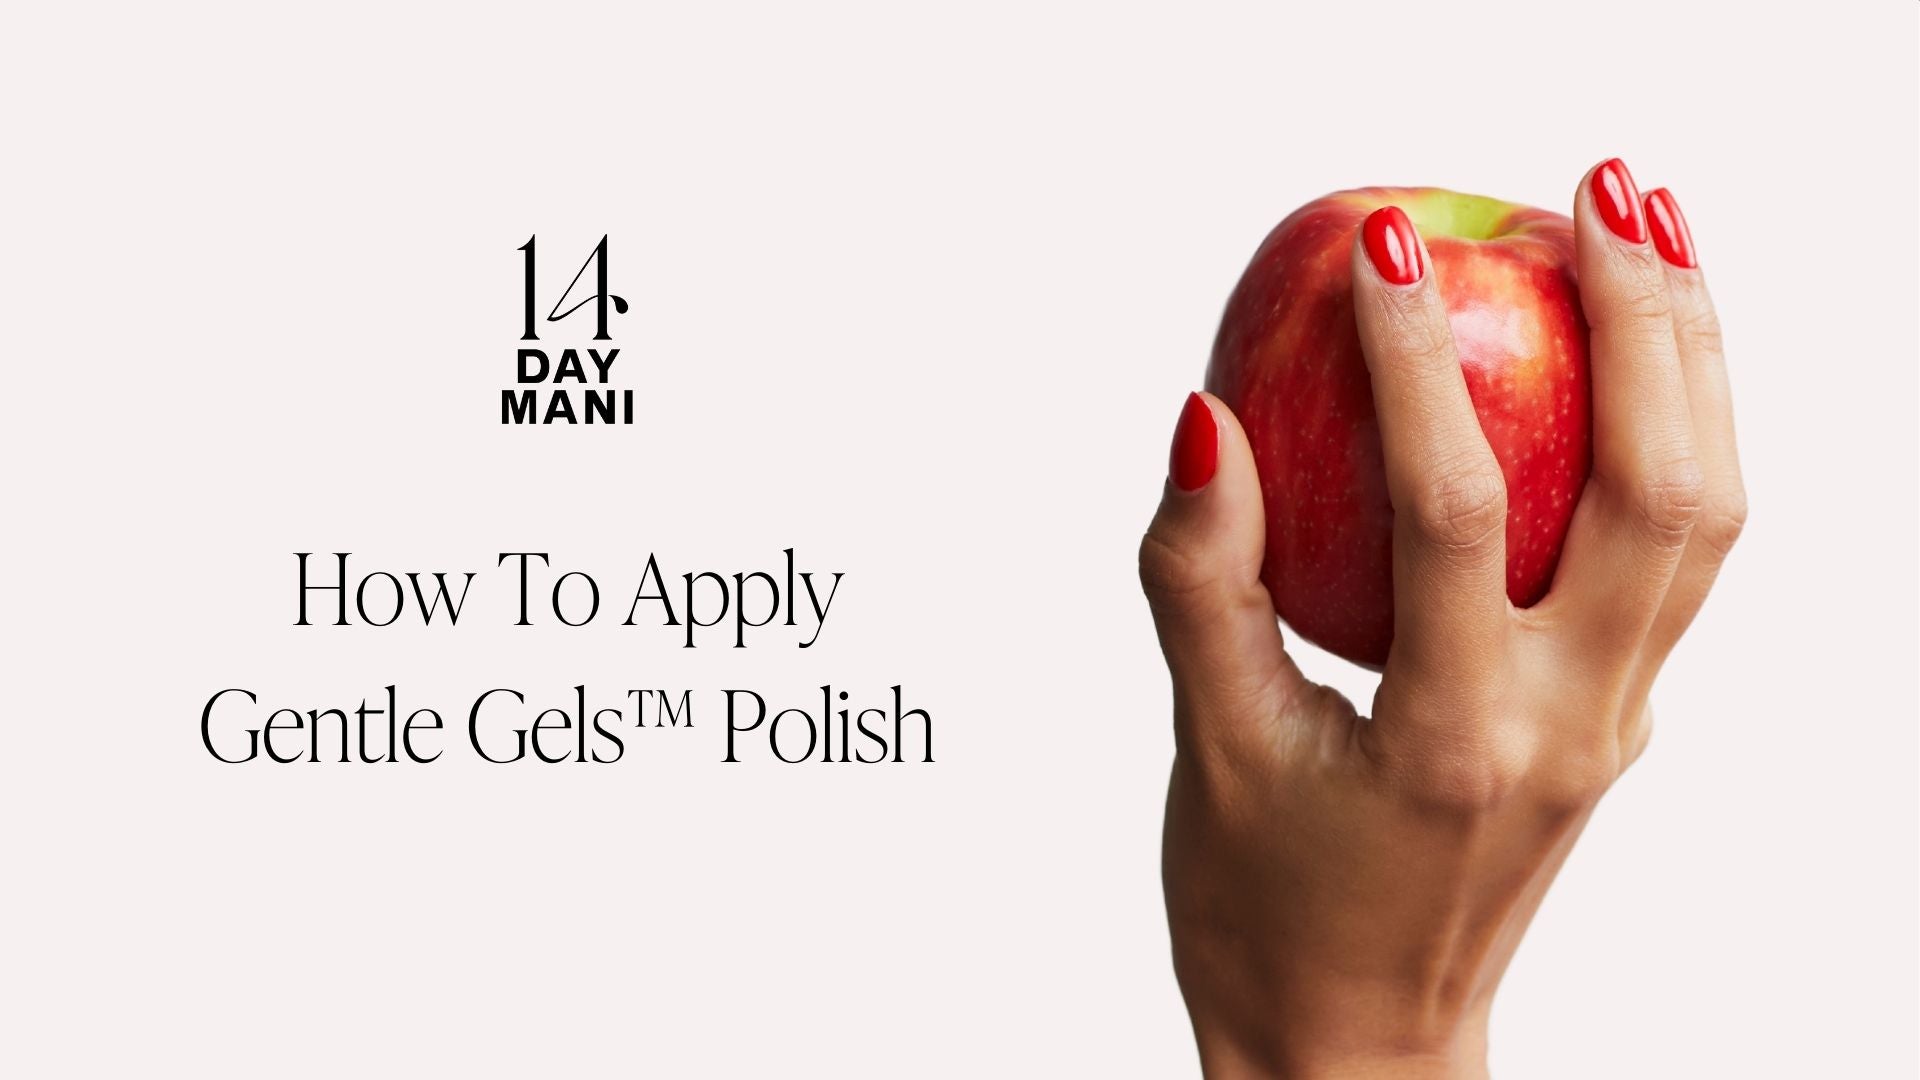 Load video: HOW TO APPLY GENTLE GELS POLISH